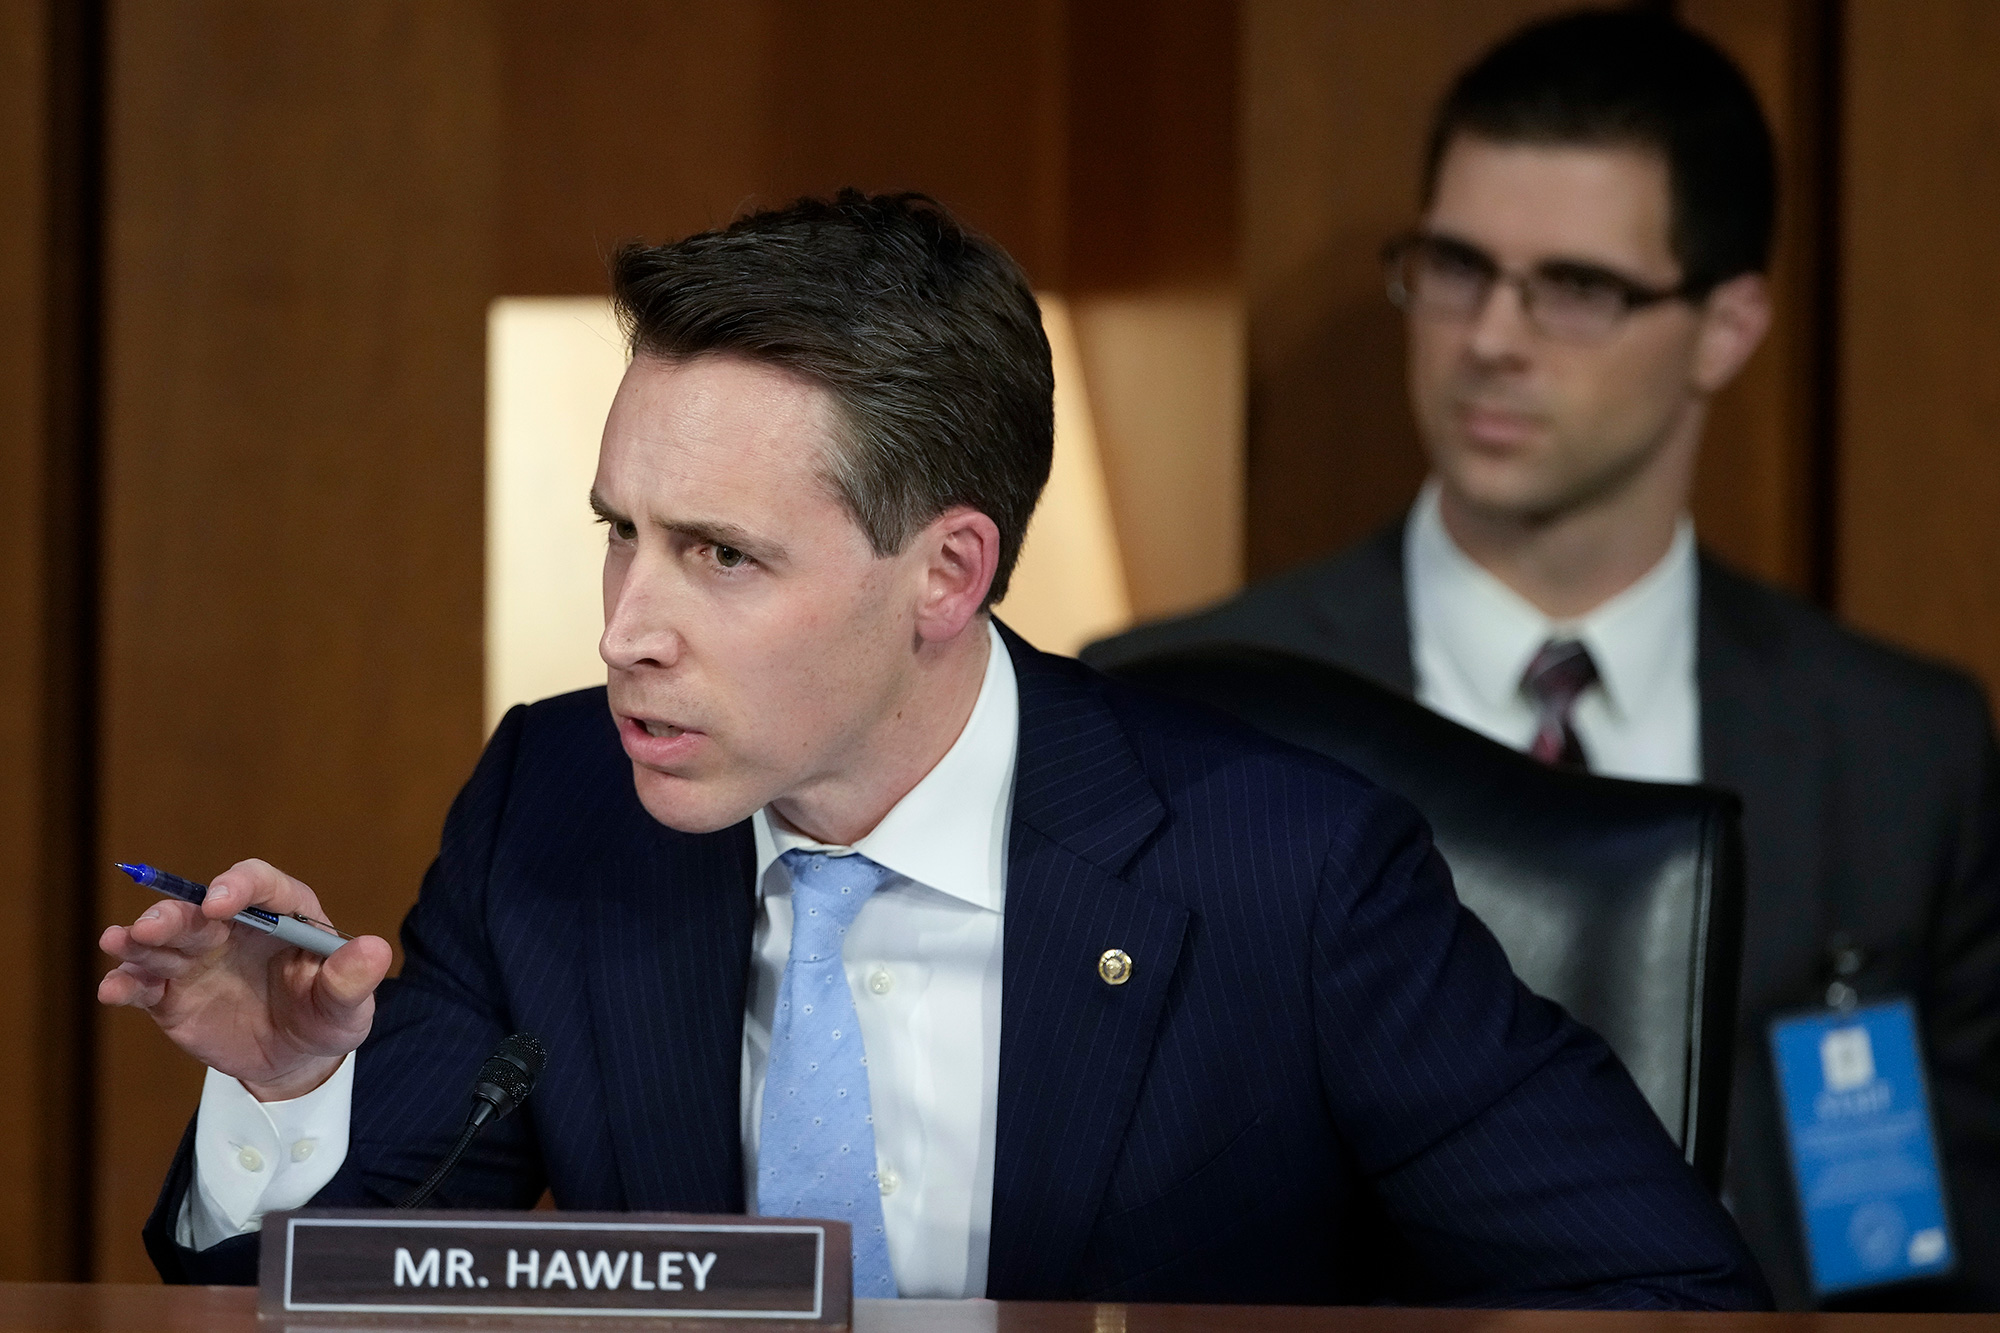 Sen. Josh Hawley questions US Supreme Court nominee Judge Ketanji Brown Jackson during her Senate Judiciary Committee confirmation hearing on March 23.